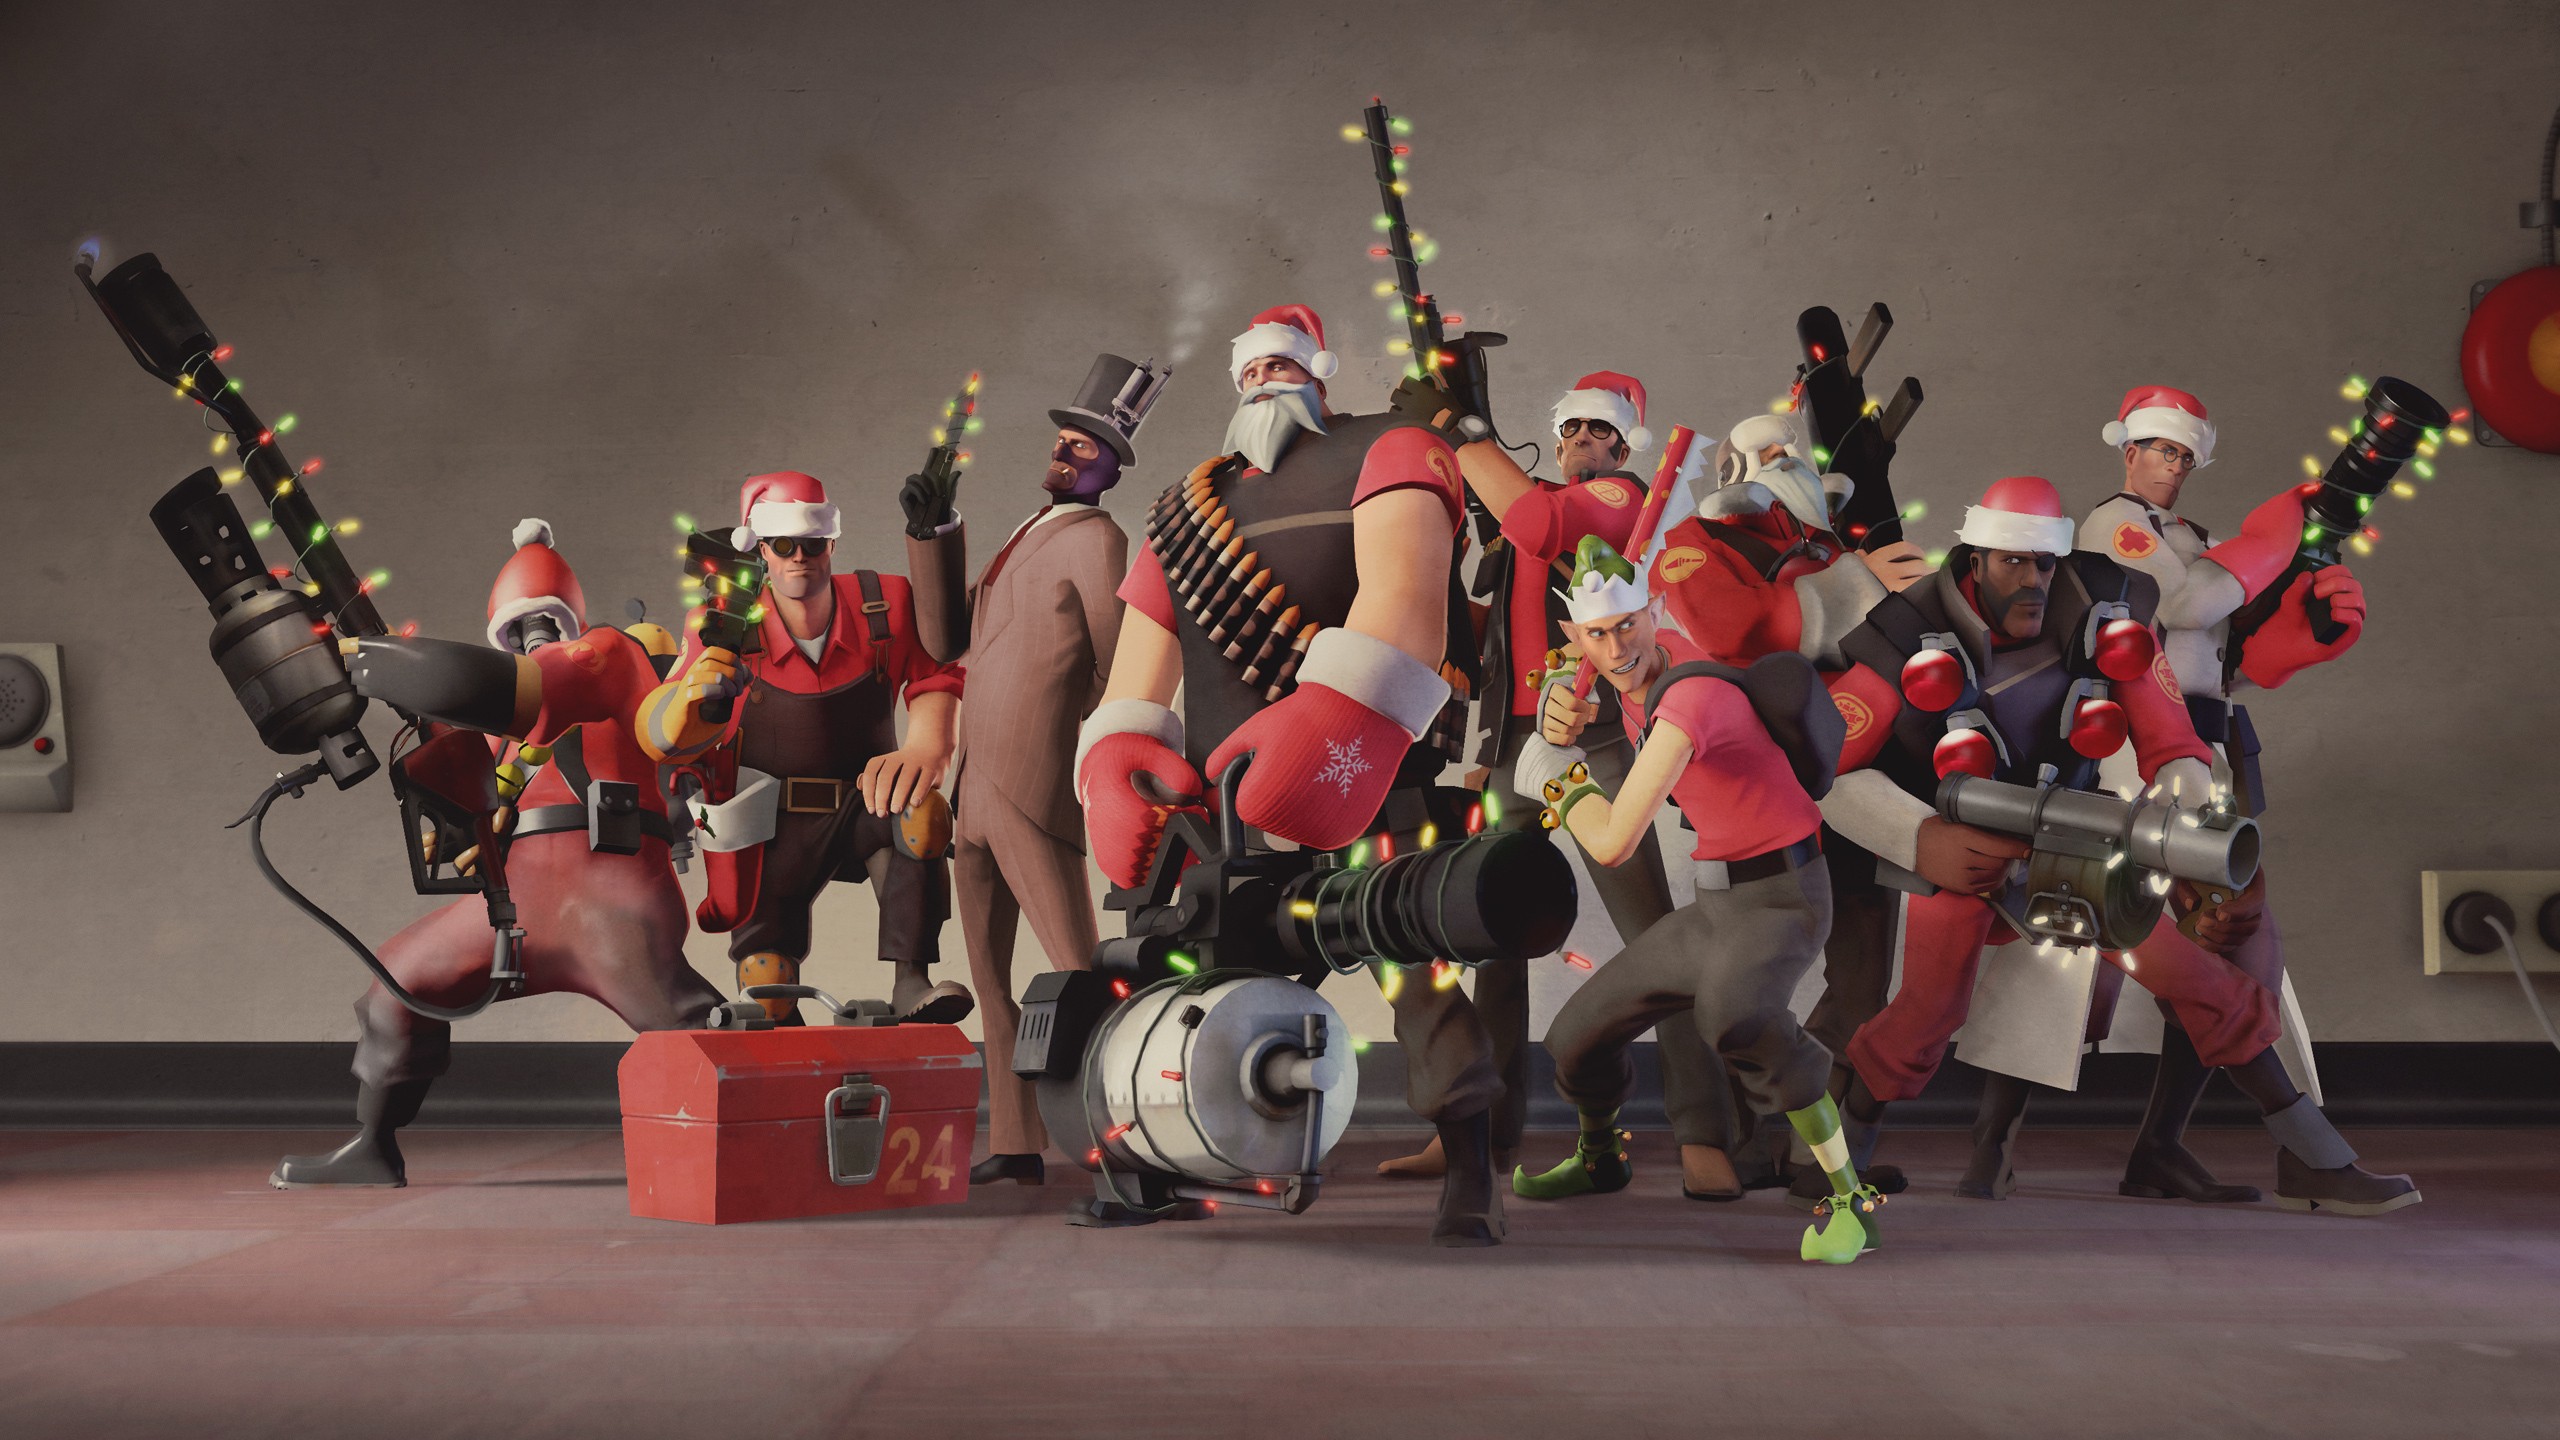 General 2560x1440 Team Fortress 2 Christmas Valve Corporation video games Scout (TF2) Soldier (TF2) Pyro (TF2) Demoman Heavy (TF2) Engineer (TF2) Medic (TF2) Sniper (TF2) Spy (TF2) CGI Christmas clothes Santa hats video game characters